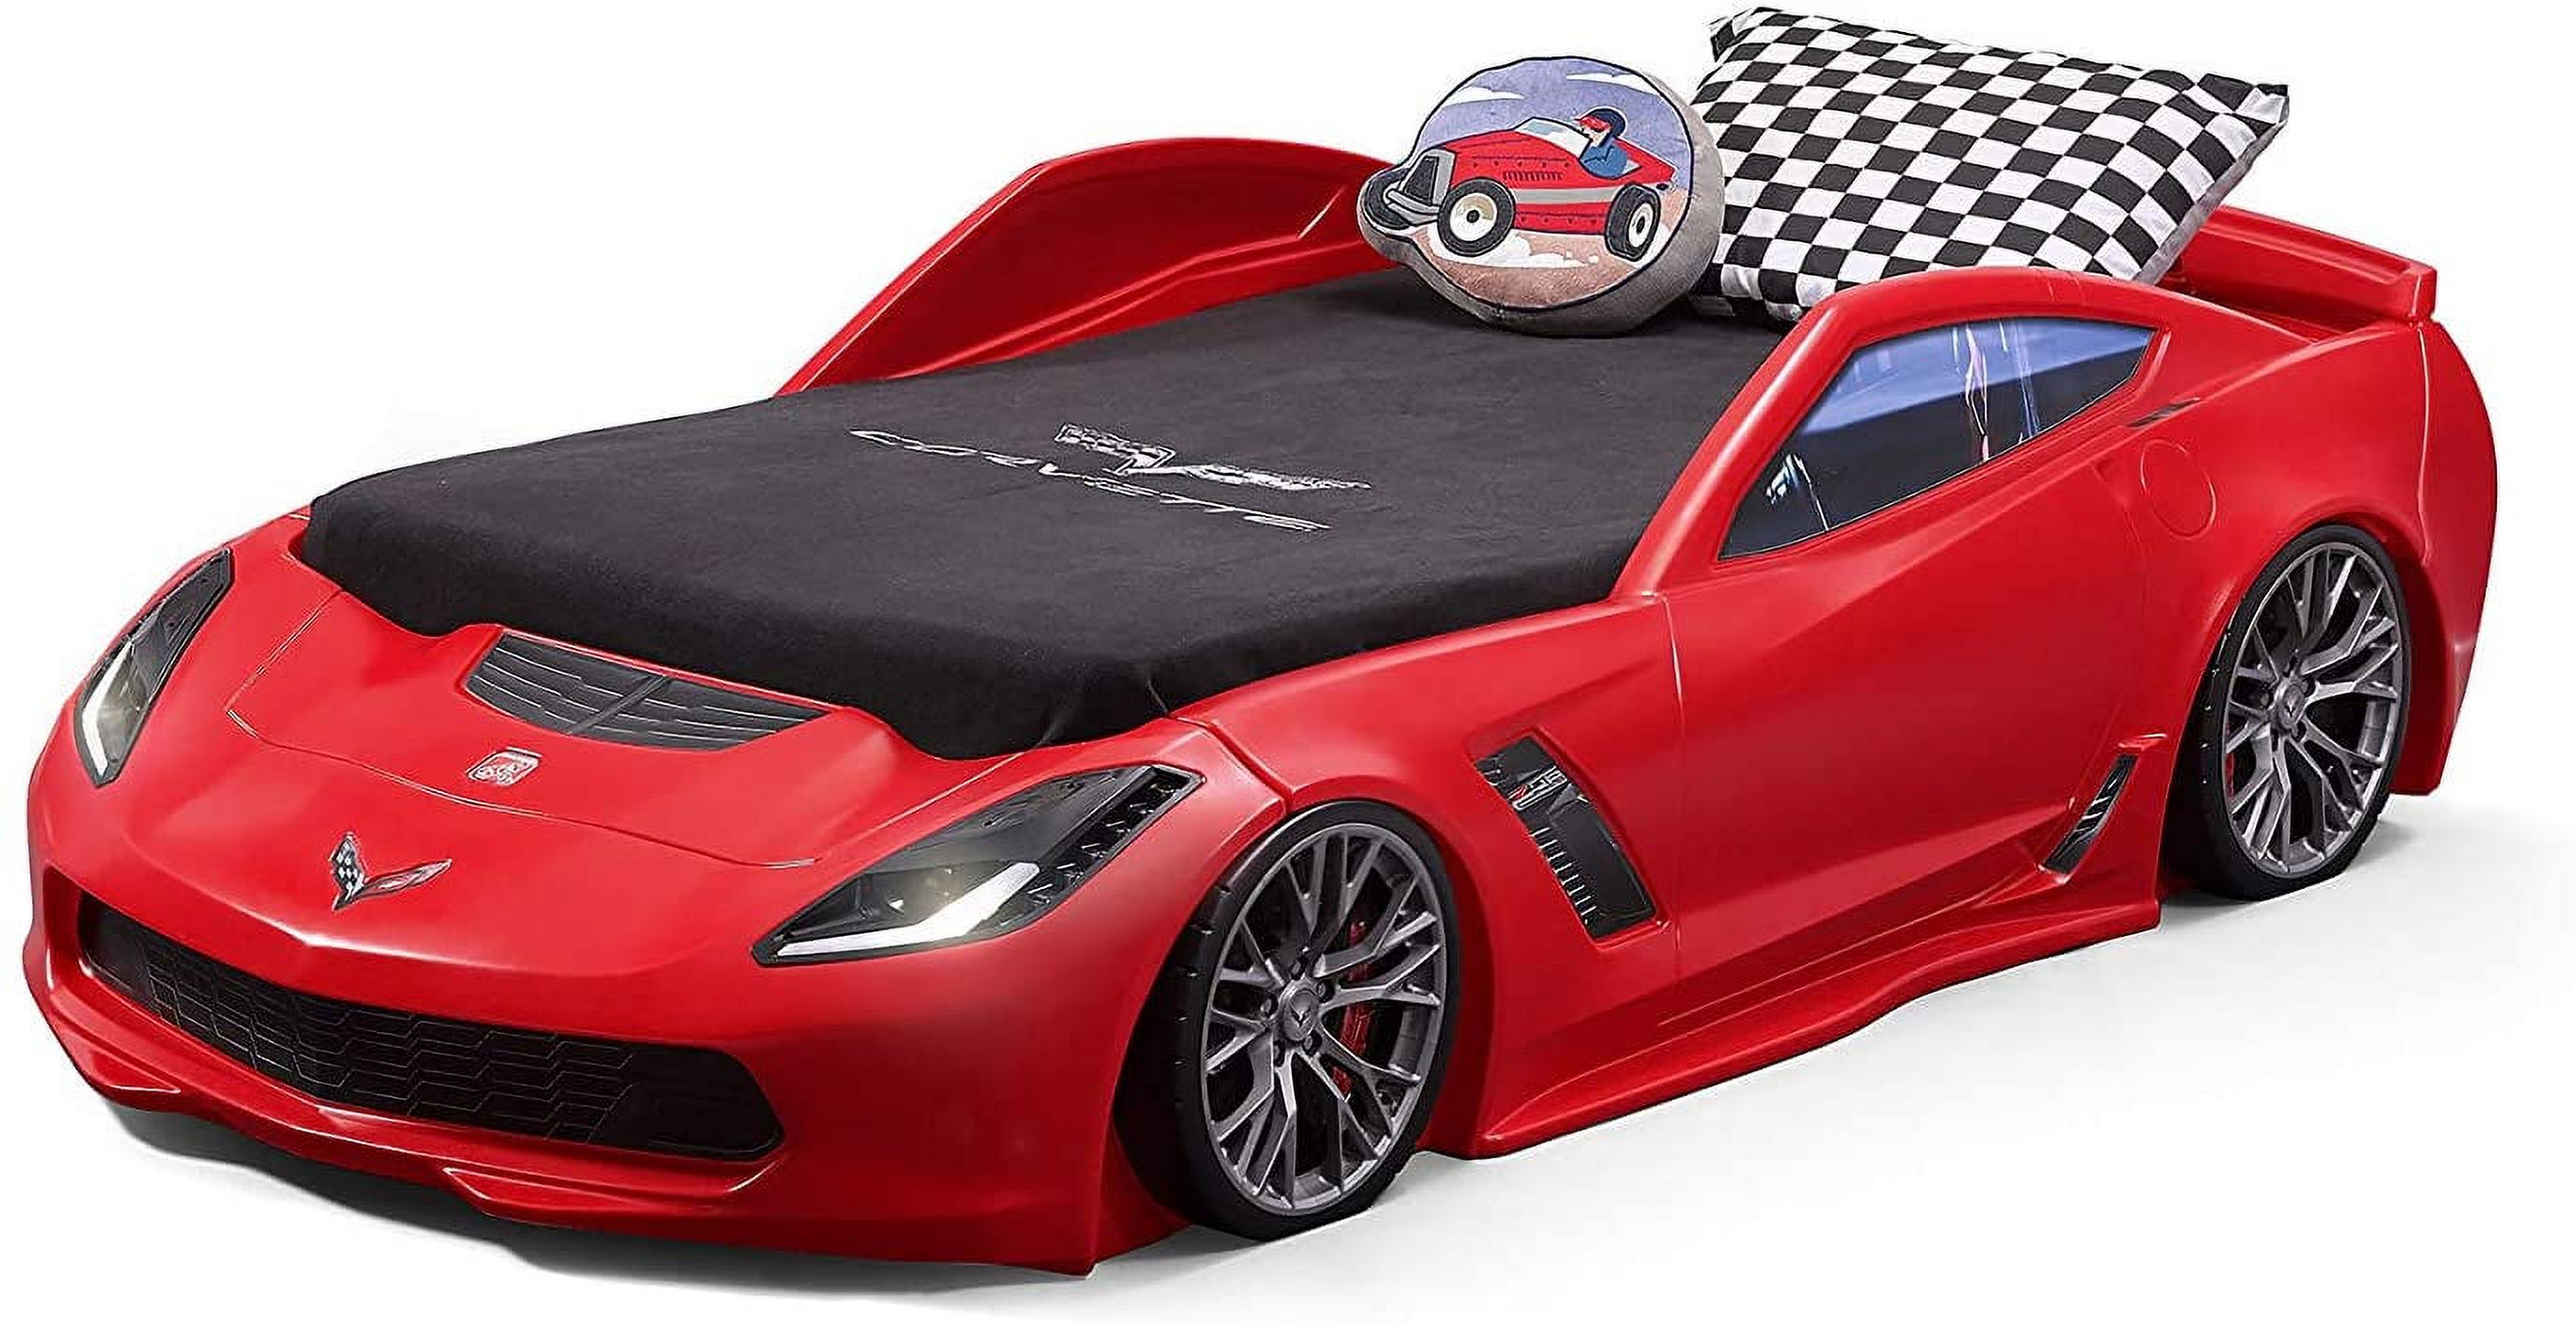 Step2 Corvette Convertible Toddler to Twin Bed with Lights, Red - image 1 of 5